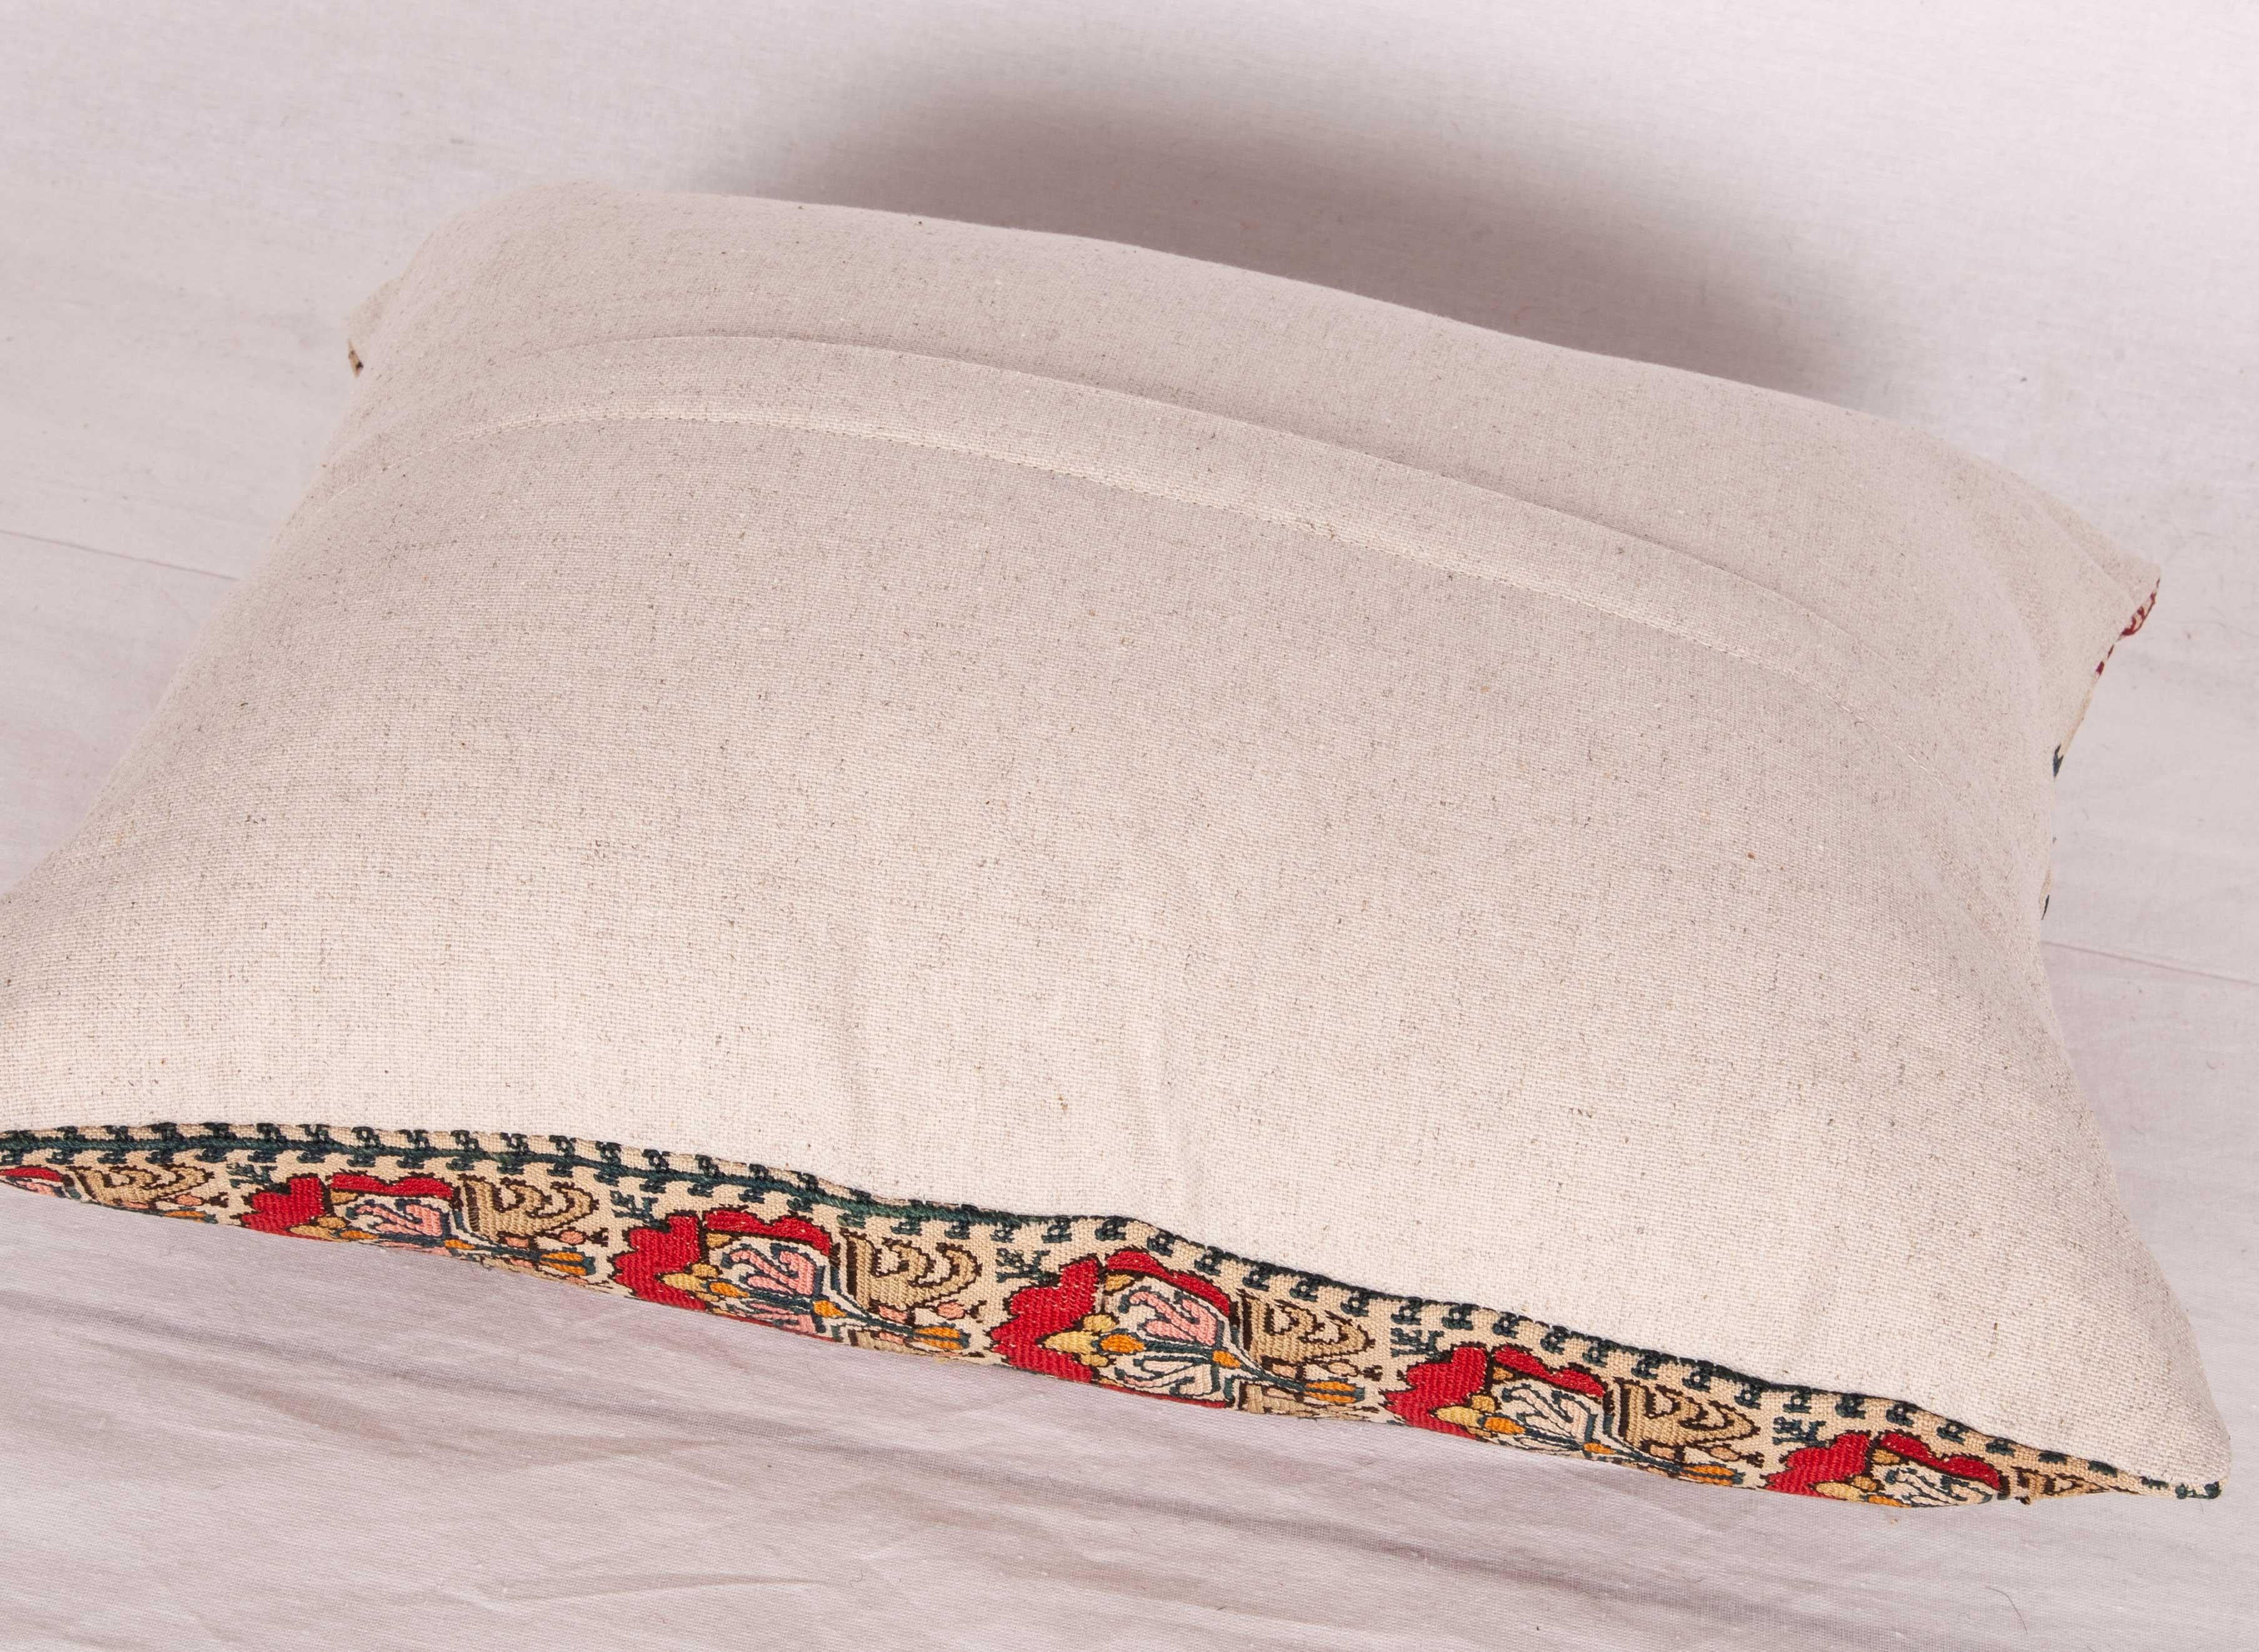 Embroidered Antique Pillow Case Fashioned From an Ottoman Greek Embroidery, 19th Century